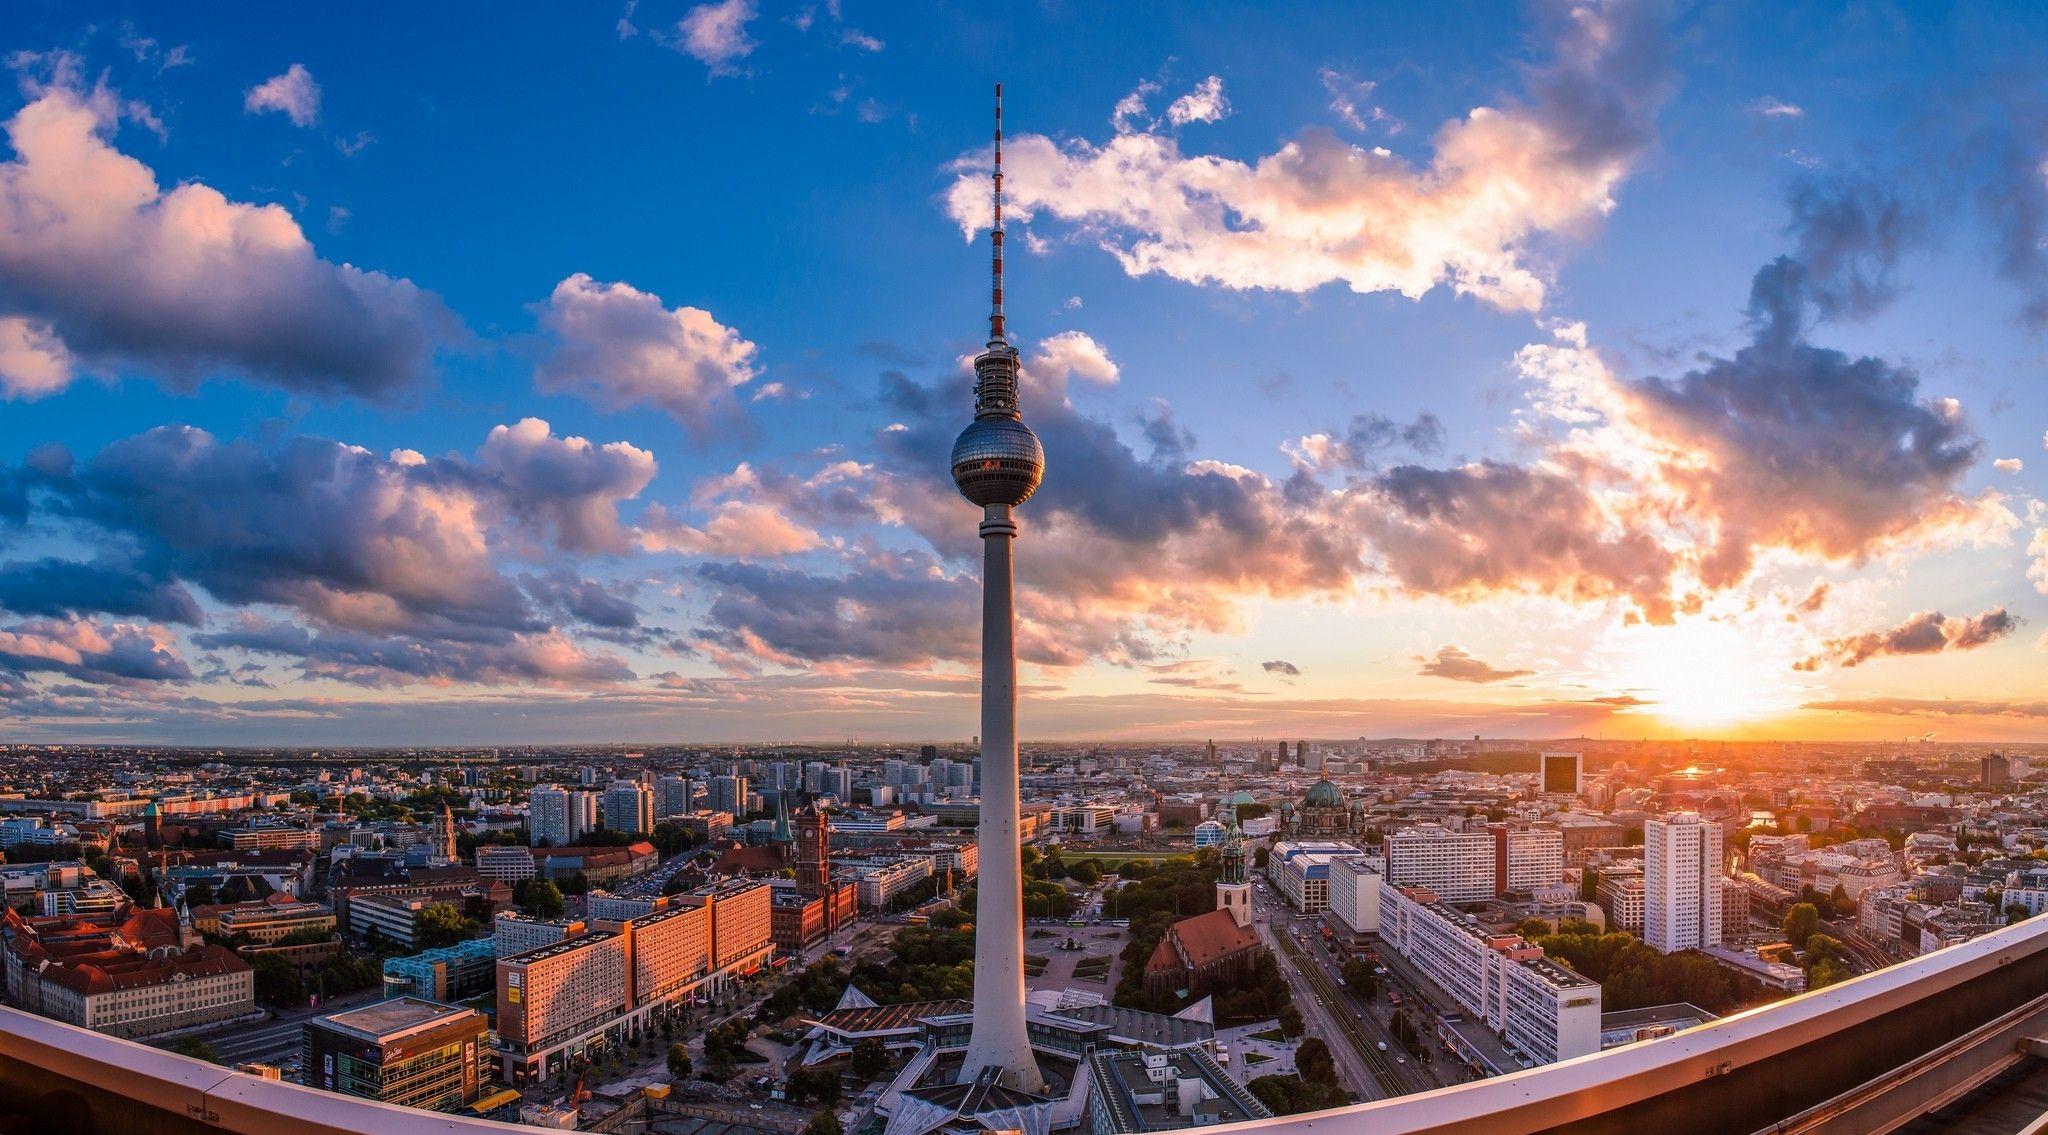 Berlin wallpapers hd, desktop backgrounds, images and pictures